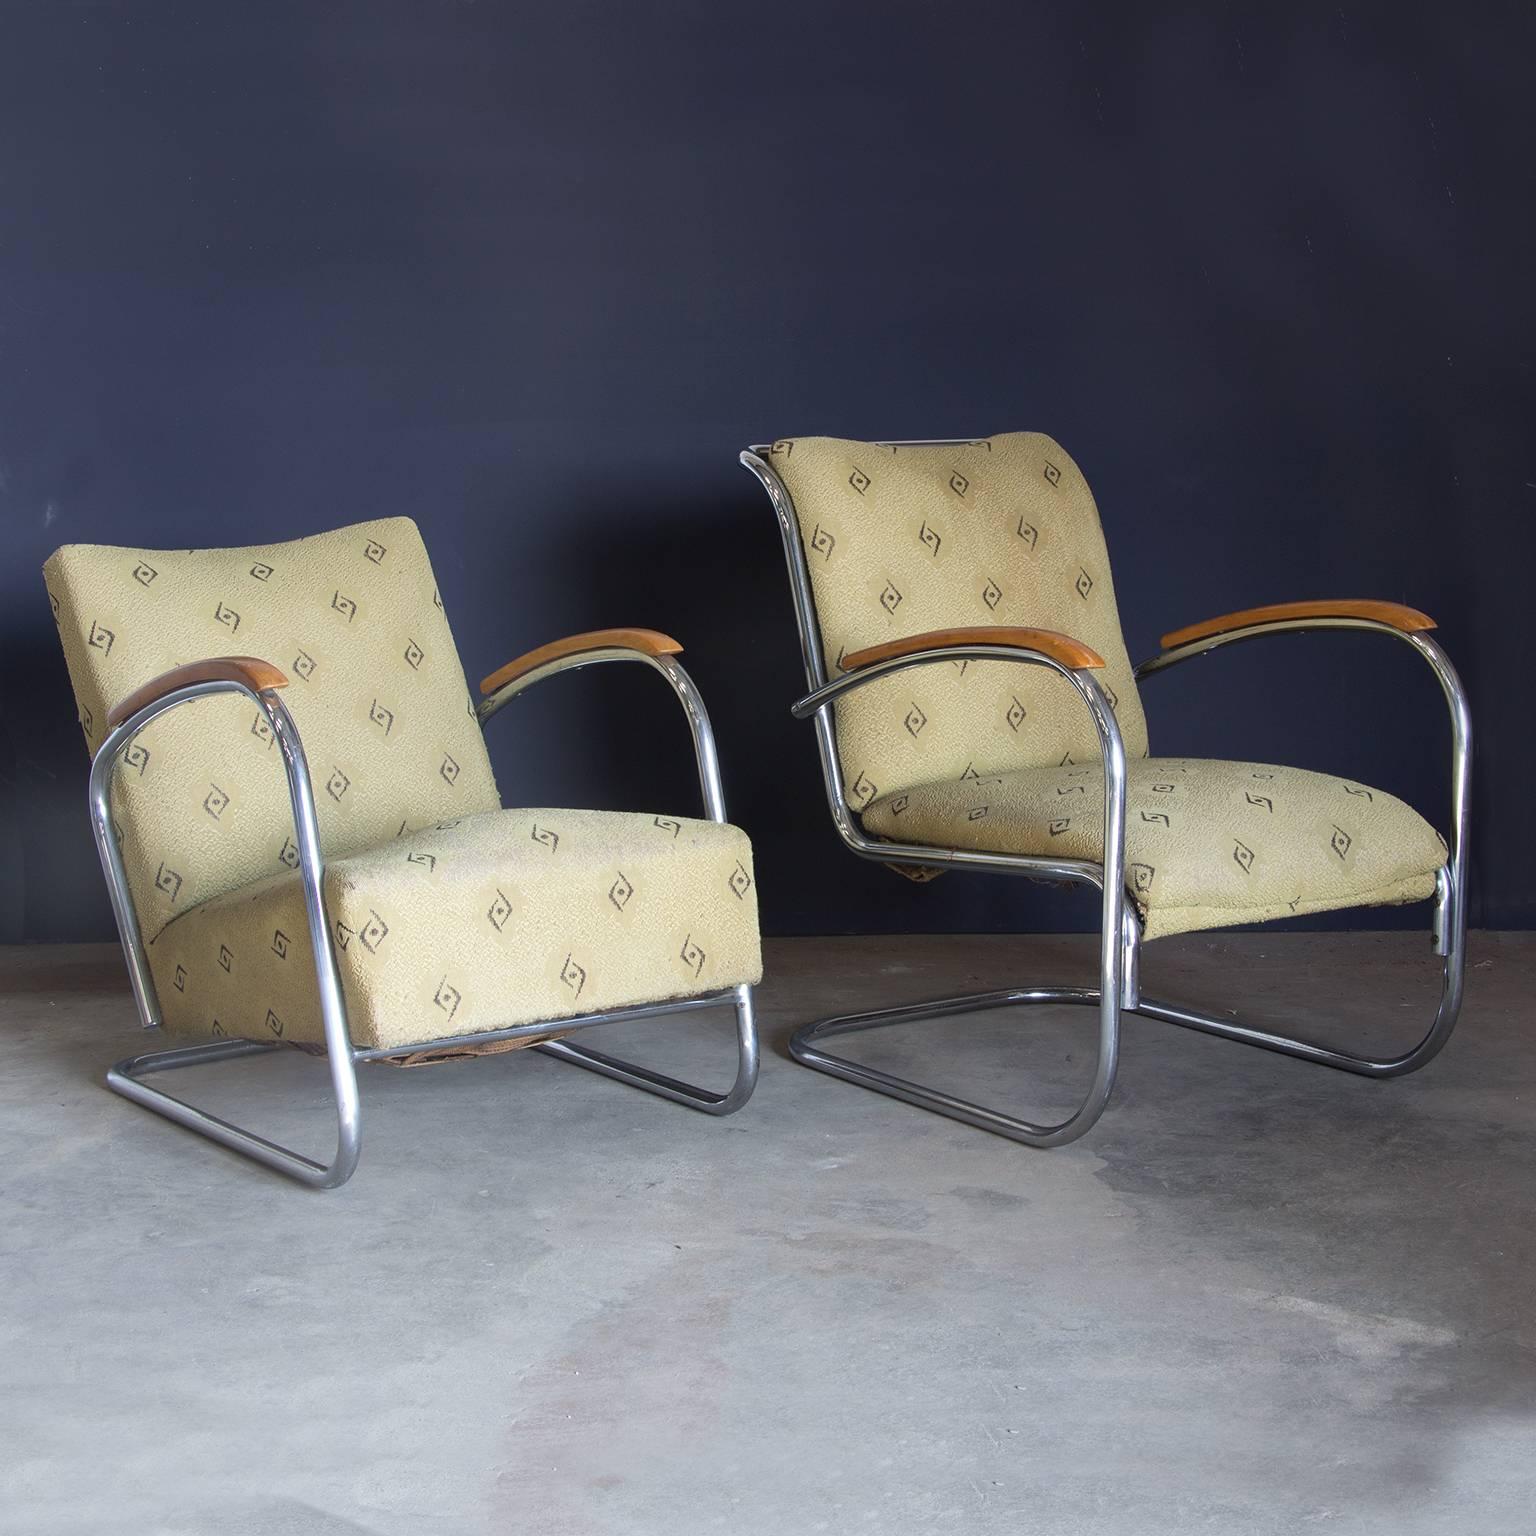 Original, Early Vintage Tubular Easy Chair with Original Fabric, circa 1930 For Sale 2